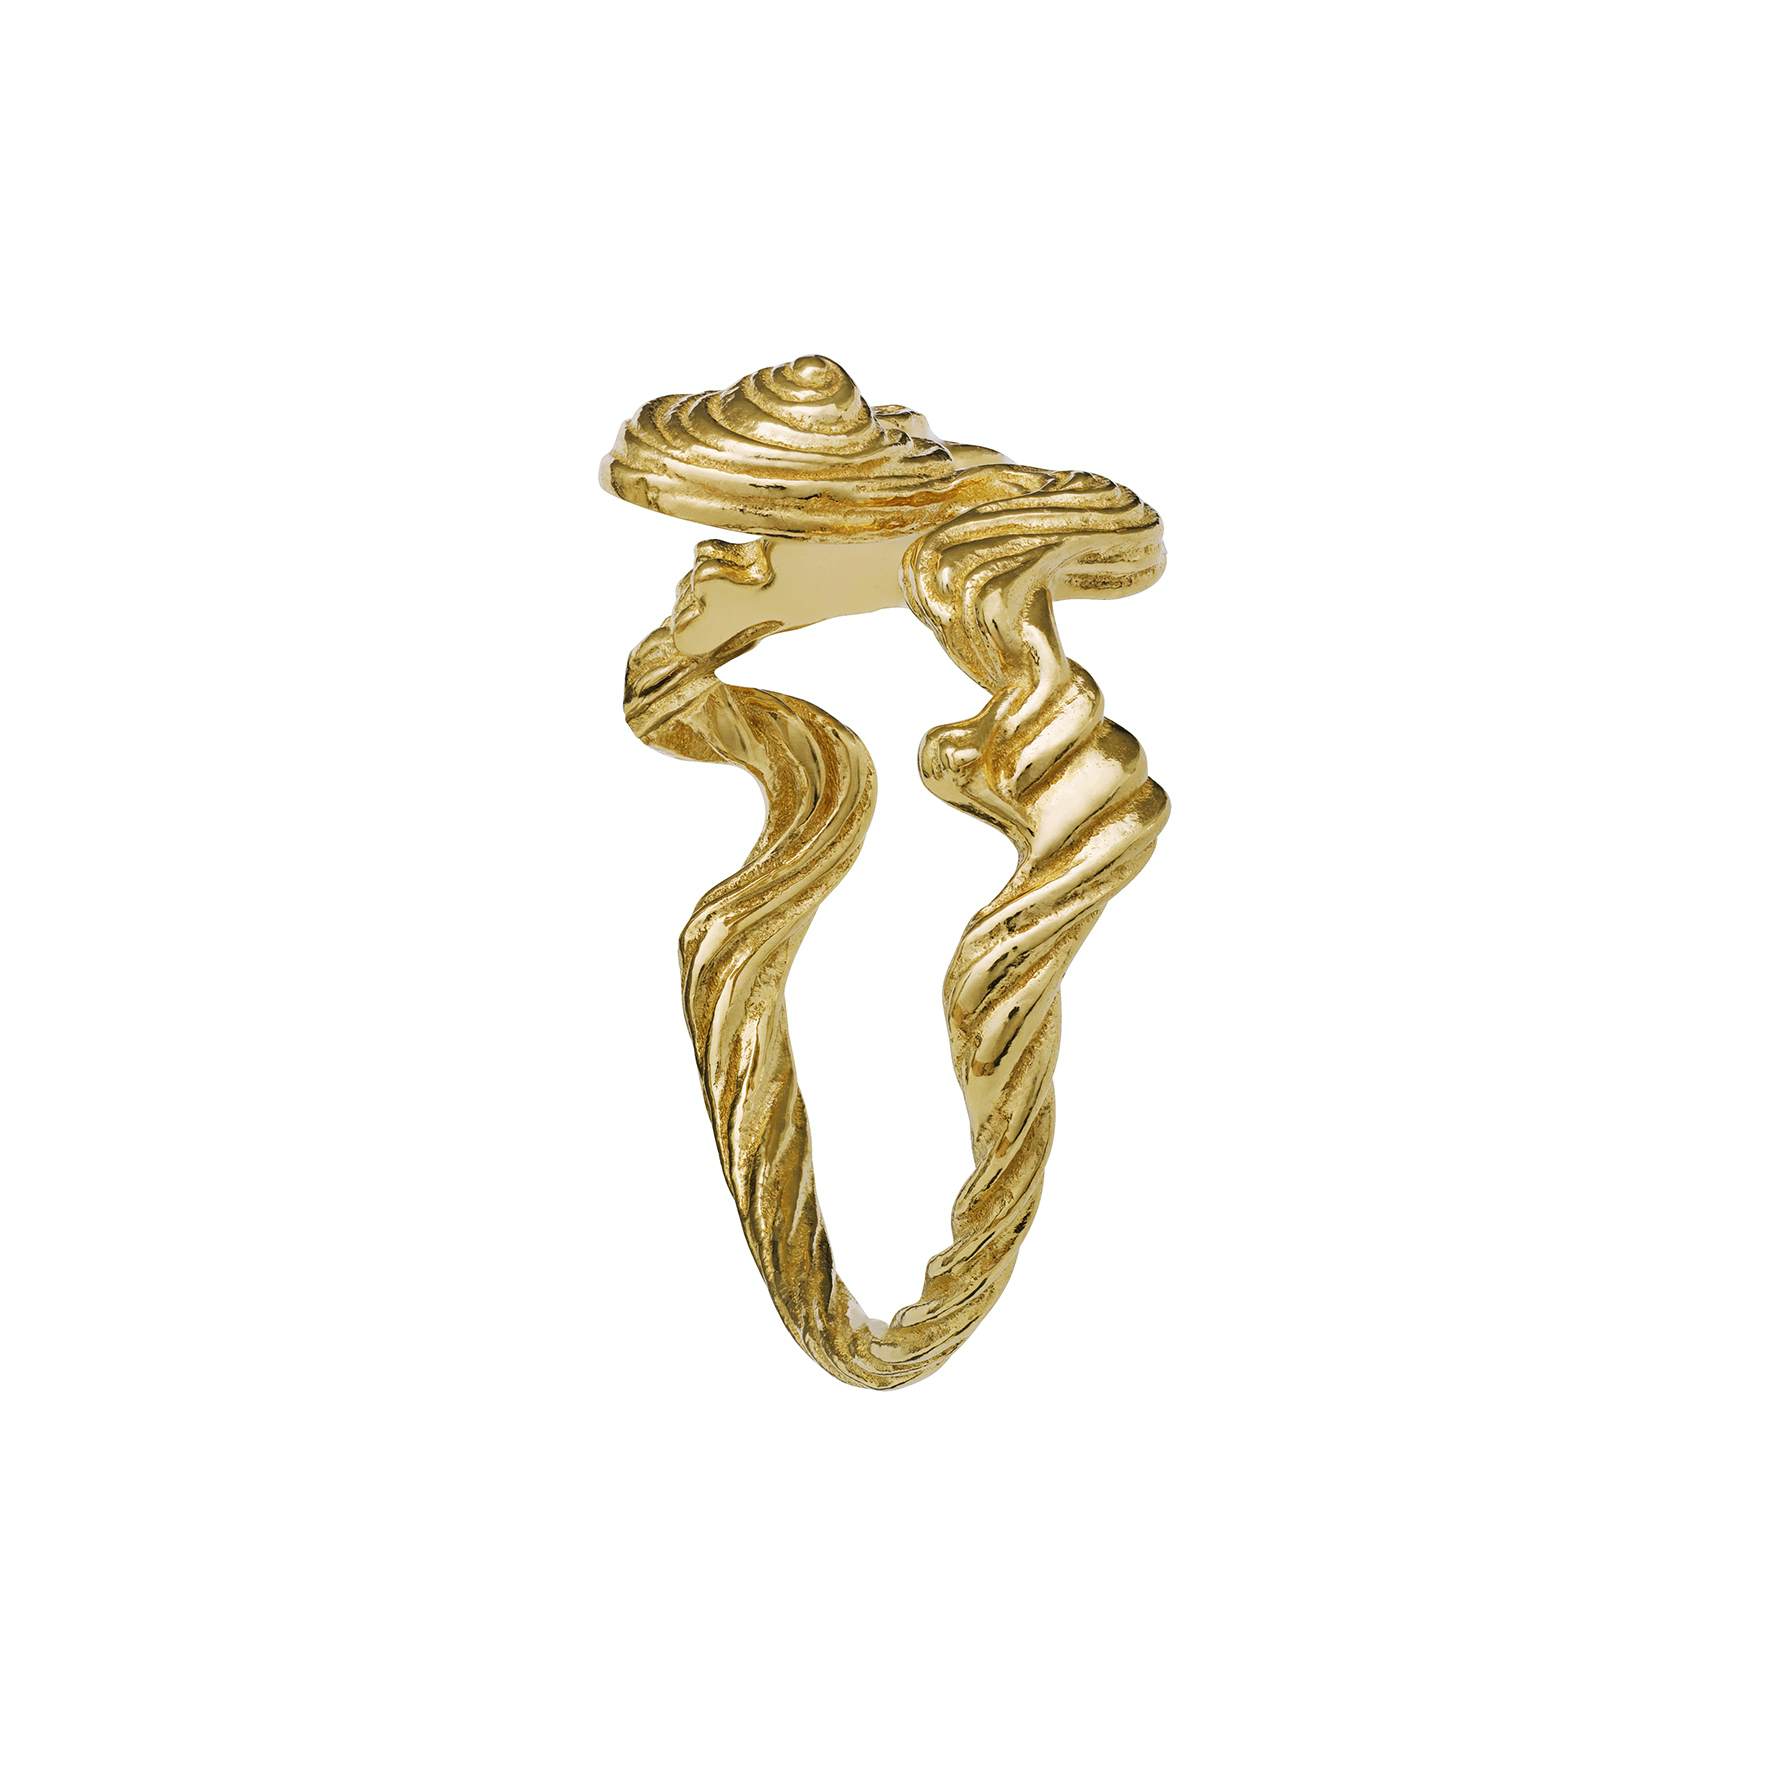 Leto Ring from Maanesten in Goldplated-Silver Sterling 925